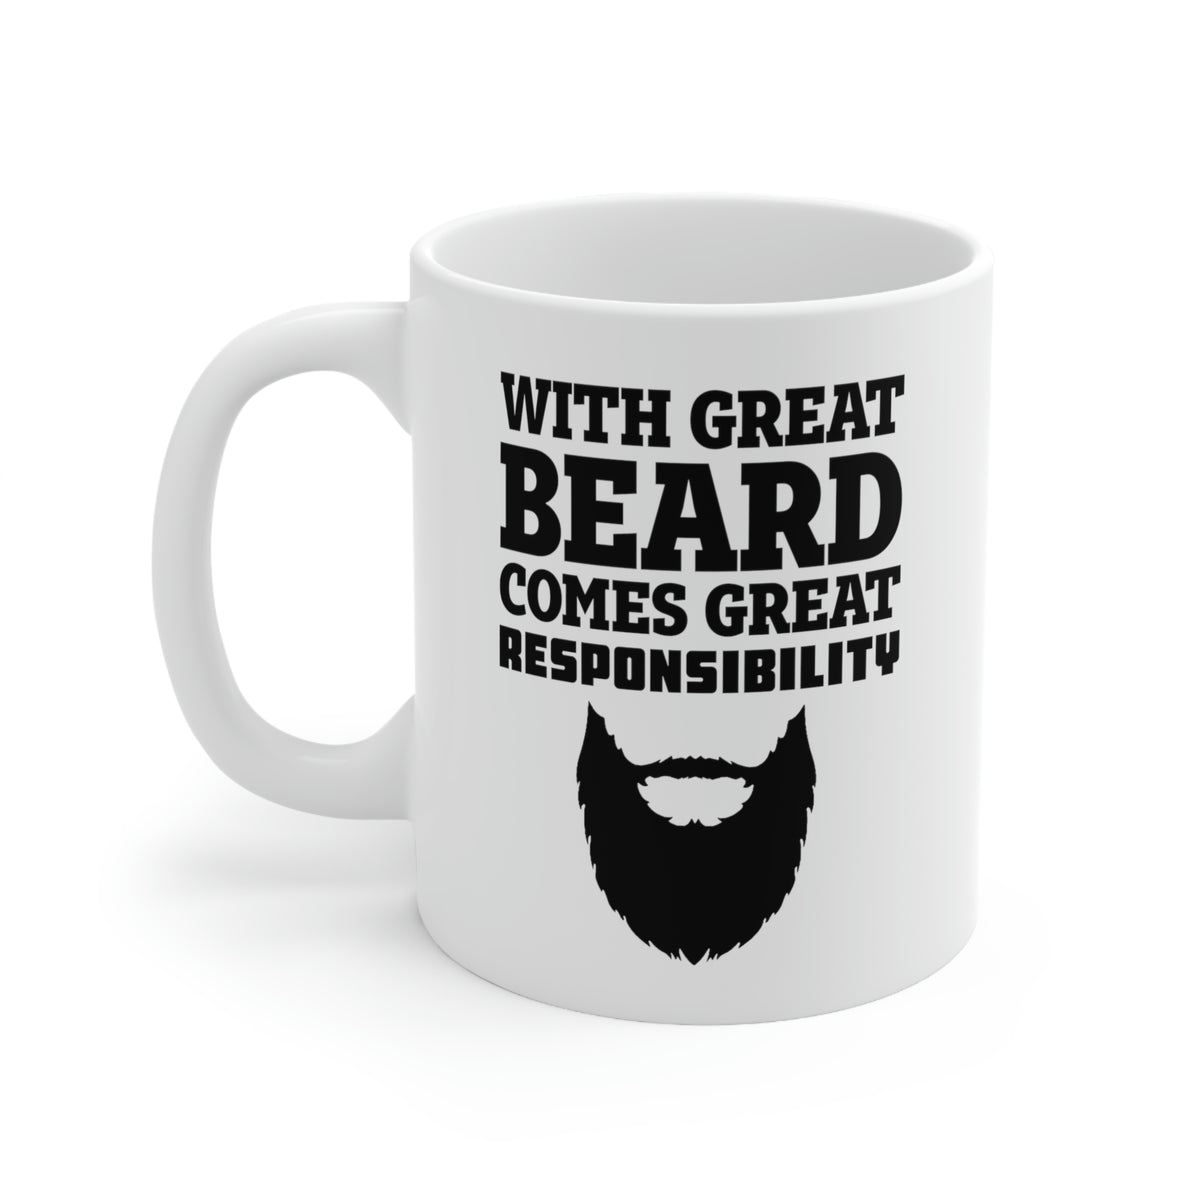 Father’s Day Gifts From Wife - With Great Beard Comes Great Responsibility White Coffee Mug, Tea Cup